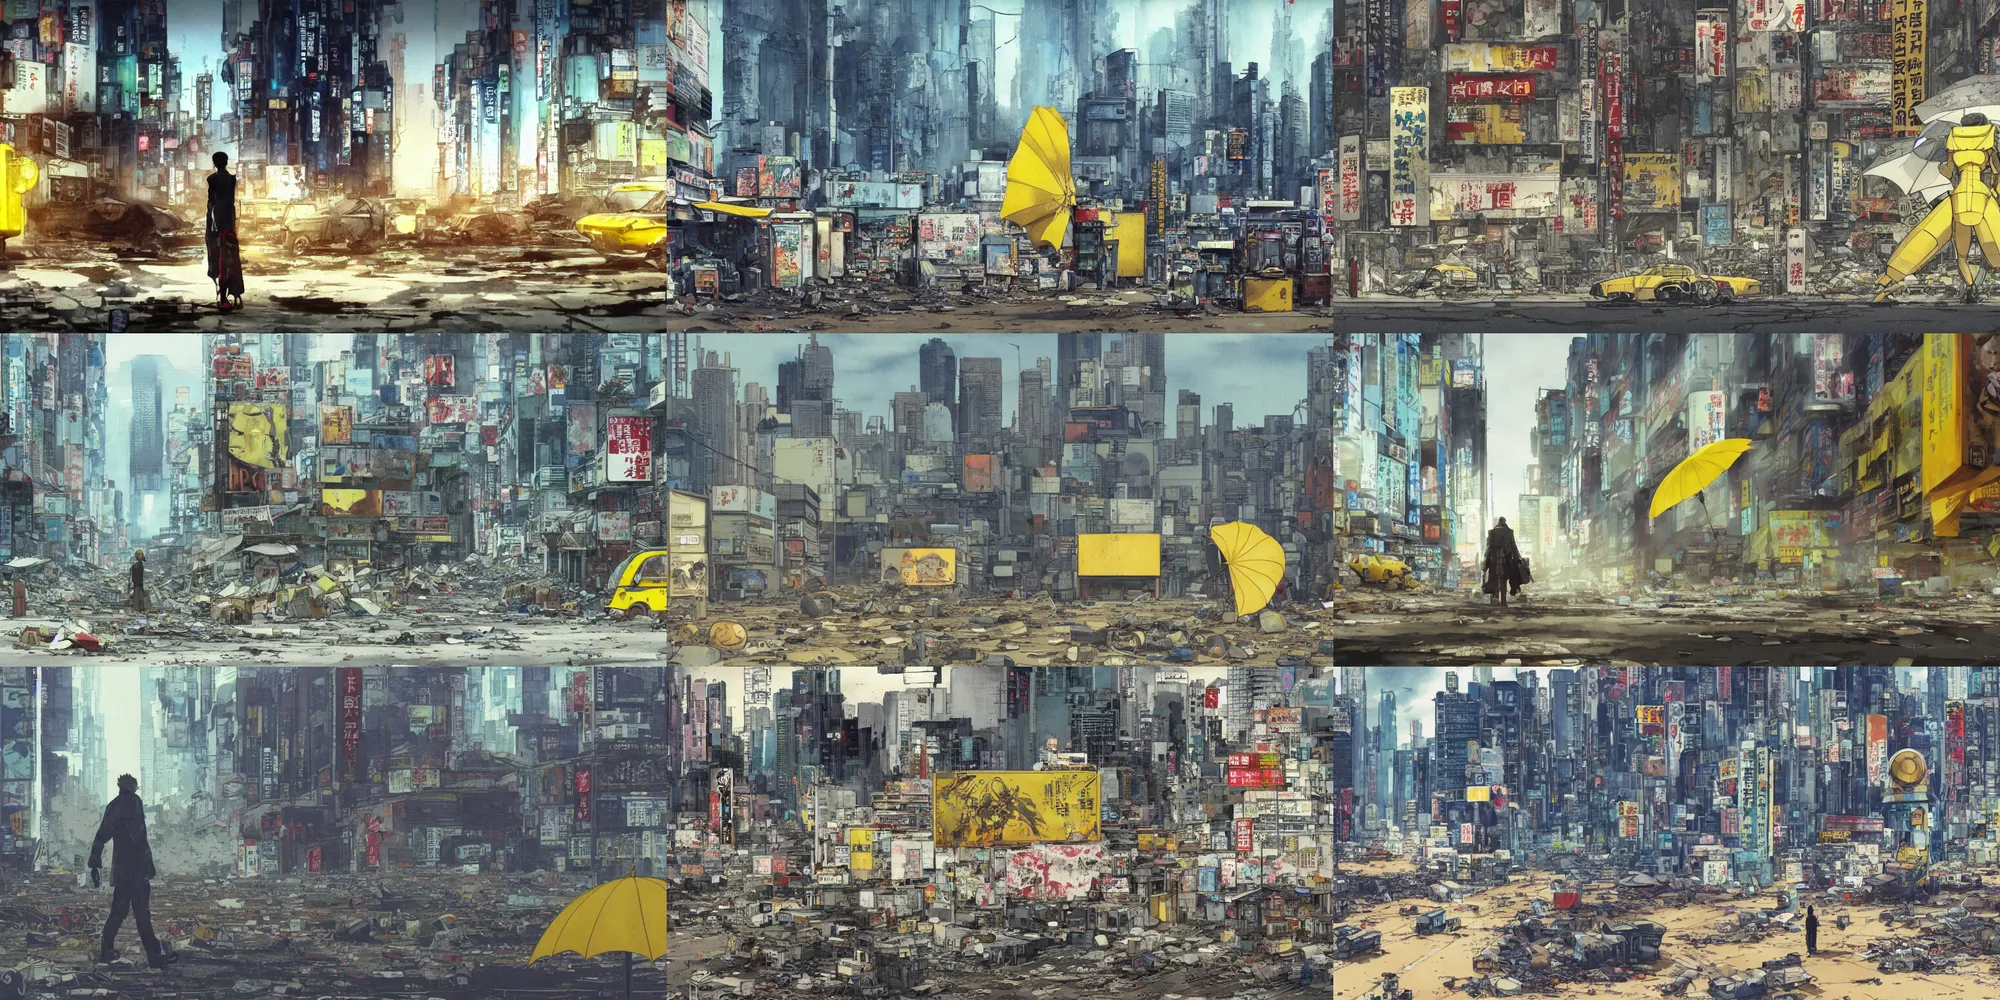 Prompt: incredible wide screenshot, ultrawide, simple watercolor, rough paper texture, katsuhiro otomo ghost in the shell movie scene, backlit distant shot of a giant robot invasion side view, yellow parasol in deserted dusty shinjuku junk town, broken vending machines, bold graphic graffiti, old pawn shop, bright sun bleached ground, mud, fog, dust, windy, scary robot monster lurks in the background, ghost mask, teeth, animatronic, black smoke, pale beige sky, junk tv, texture, shell, brown mud, dust, tangled overhead wires, telephone pole, dusty, dry, pencil marks, genius party,shinjuku, koju morimoto, katsuya terada, masamune shirow, tatsuyuki tanaka hd, 4k, remaster, dynamic camera angle, deep 3 point perspective, fish eye, dynamic scene